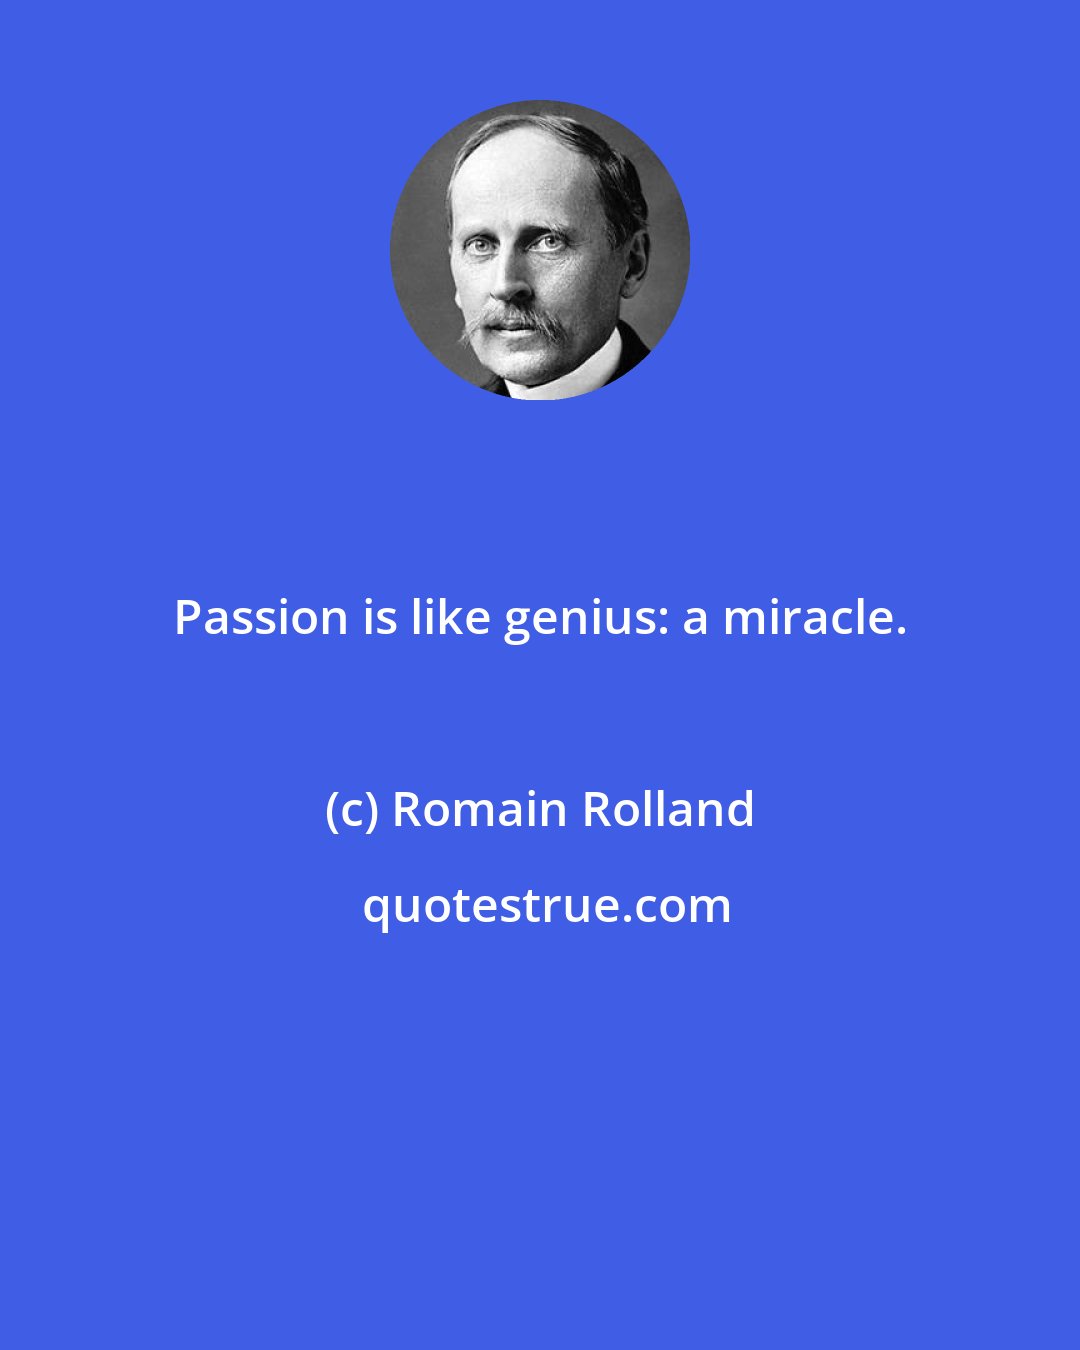 Romain Rolland: Passion is like genius: a miracle.